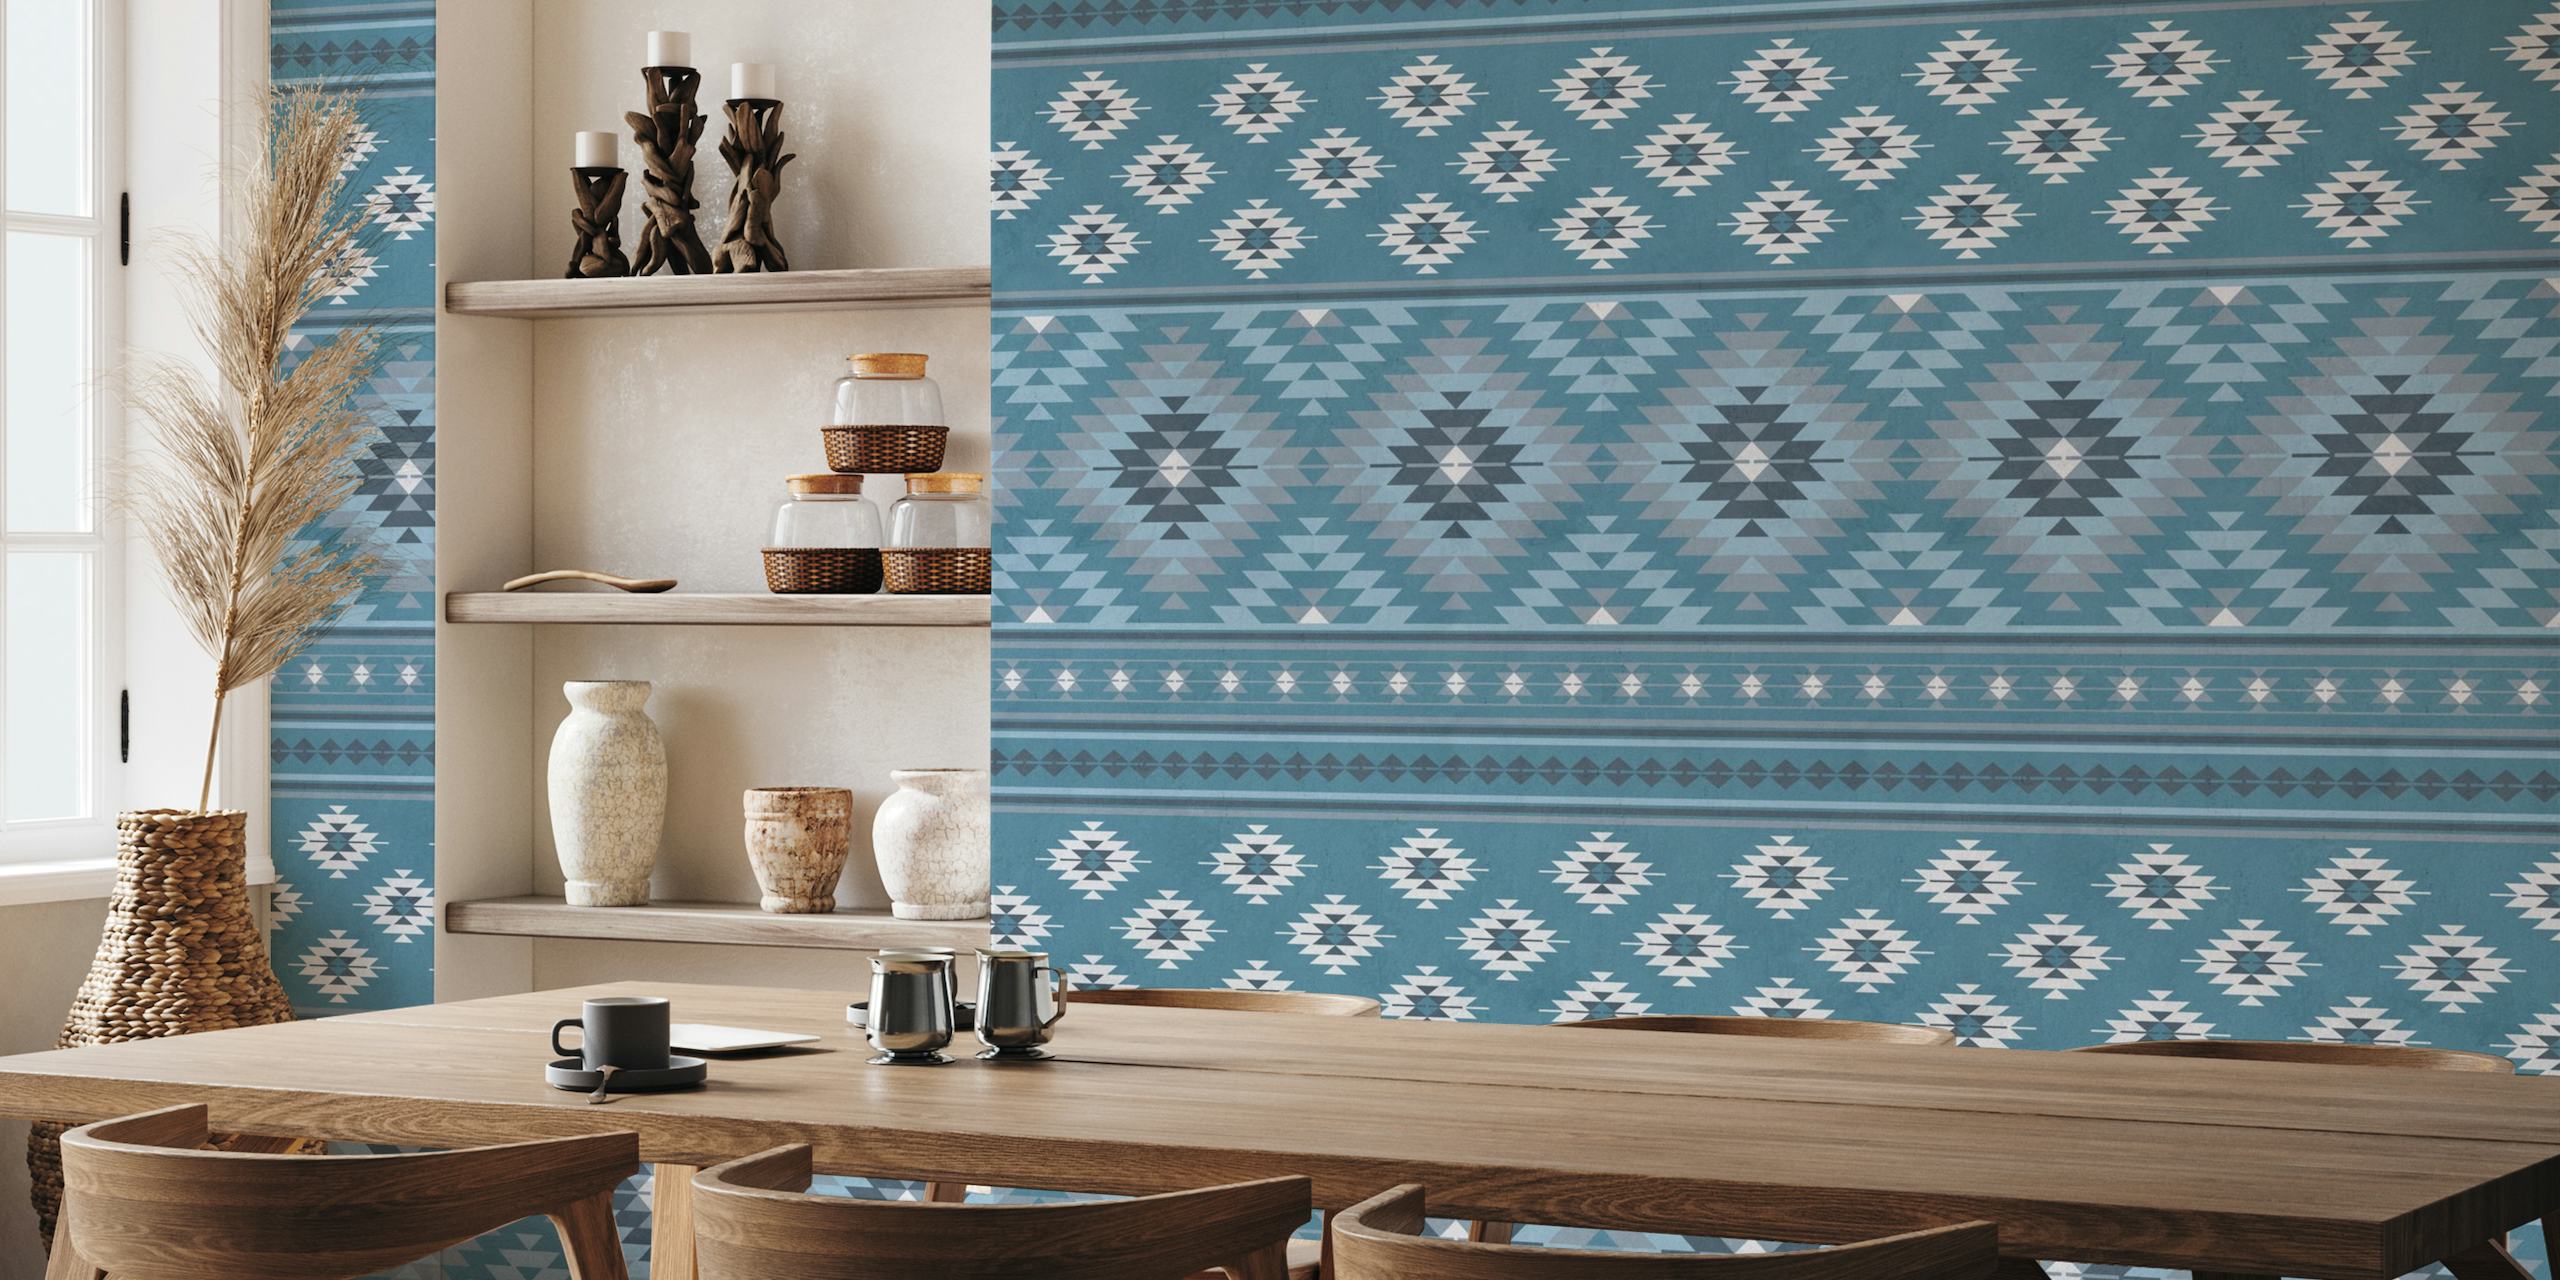 Kilim Stripes in Slate Denim Blue Large wall mural with traditional geometric patterns